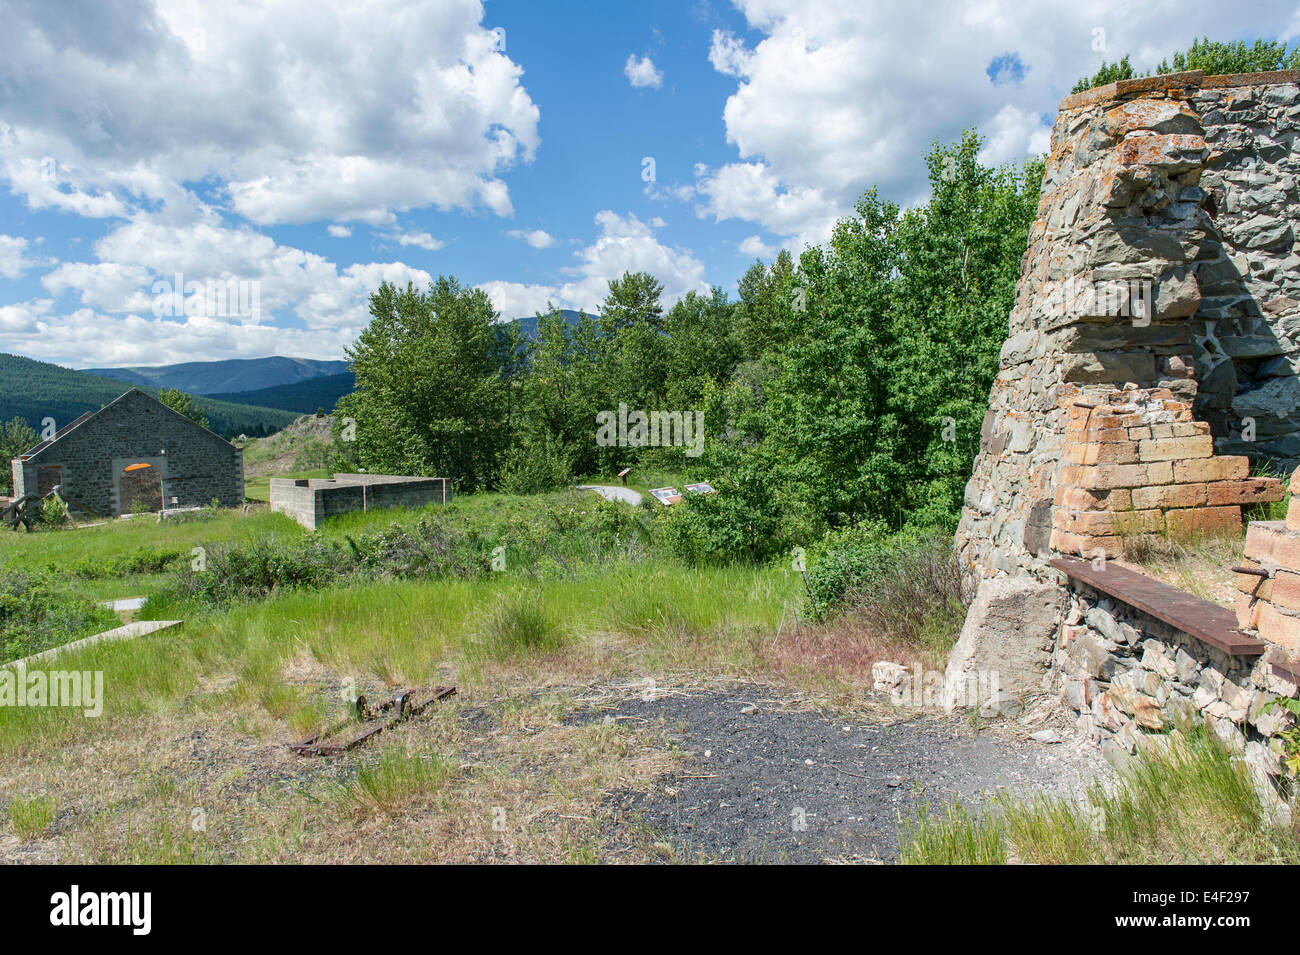 Leitch Collieries Provincial Historic Site, In Crowsnest Pass Alberta Canada Stock Photo